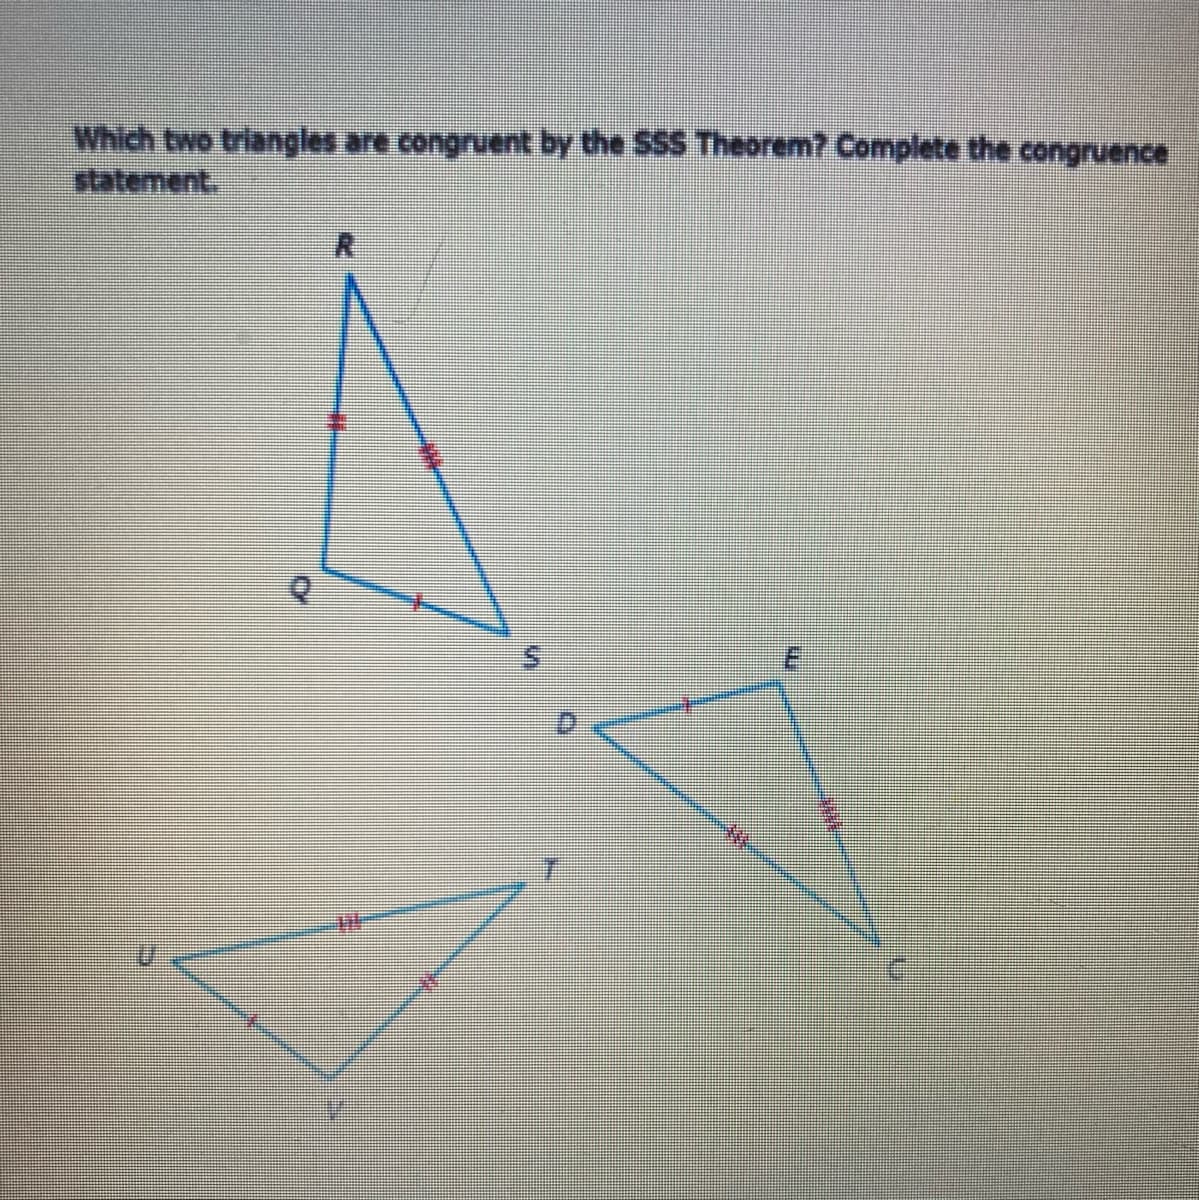 Which two triangles are congruent by the SSS Theorem? Complete the congruence
क०tenent.
R.
